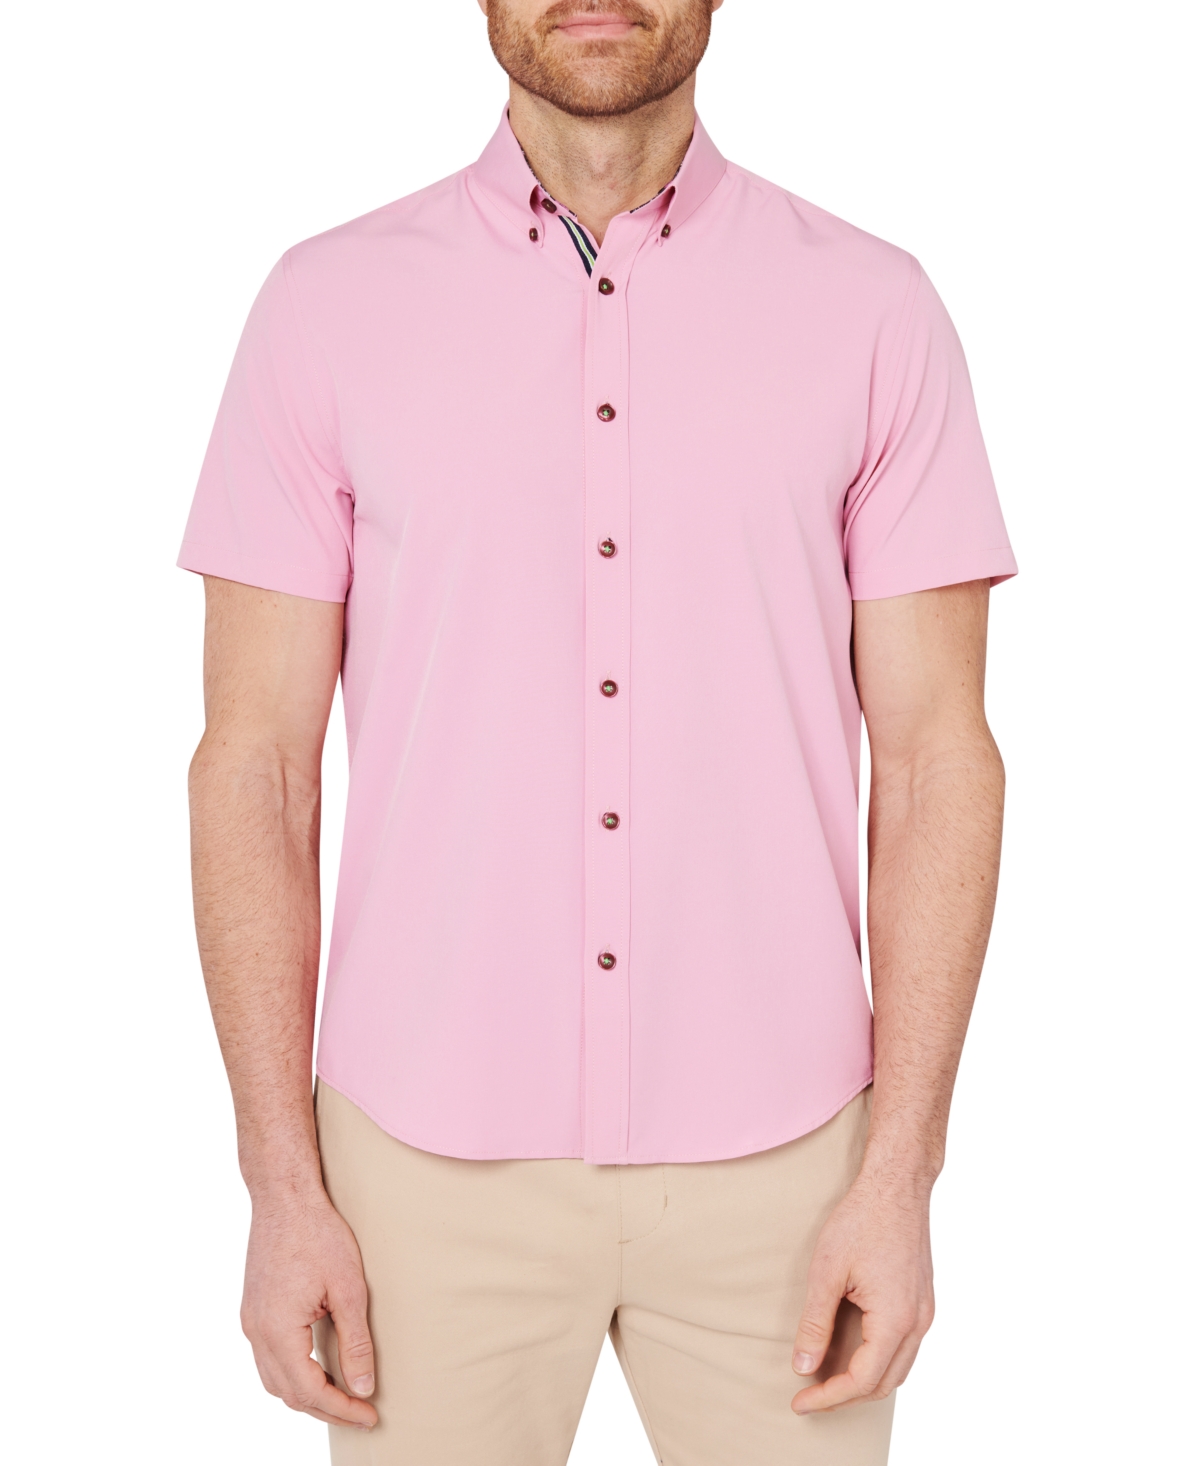 Society Of Threads Men's Slim Fit Non-iron Solid Performance Stretch Button-down Shirt In Pink